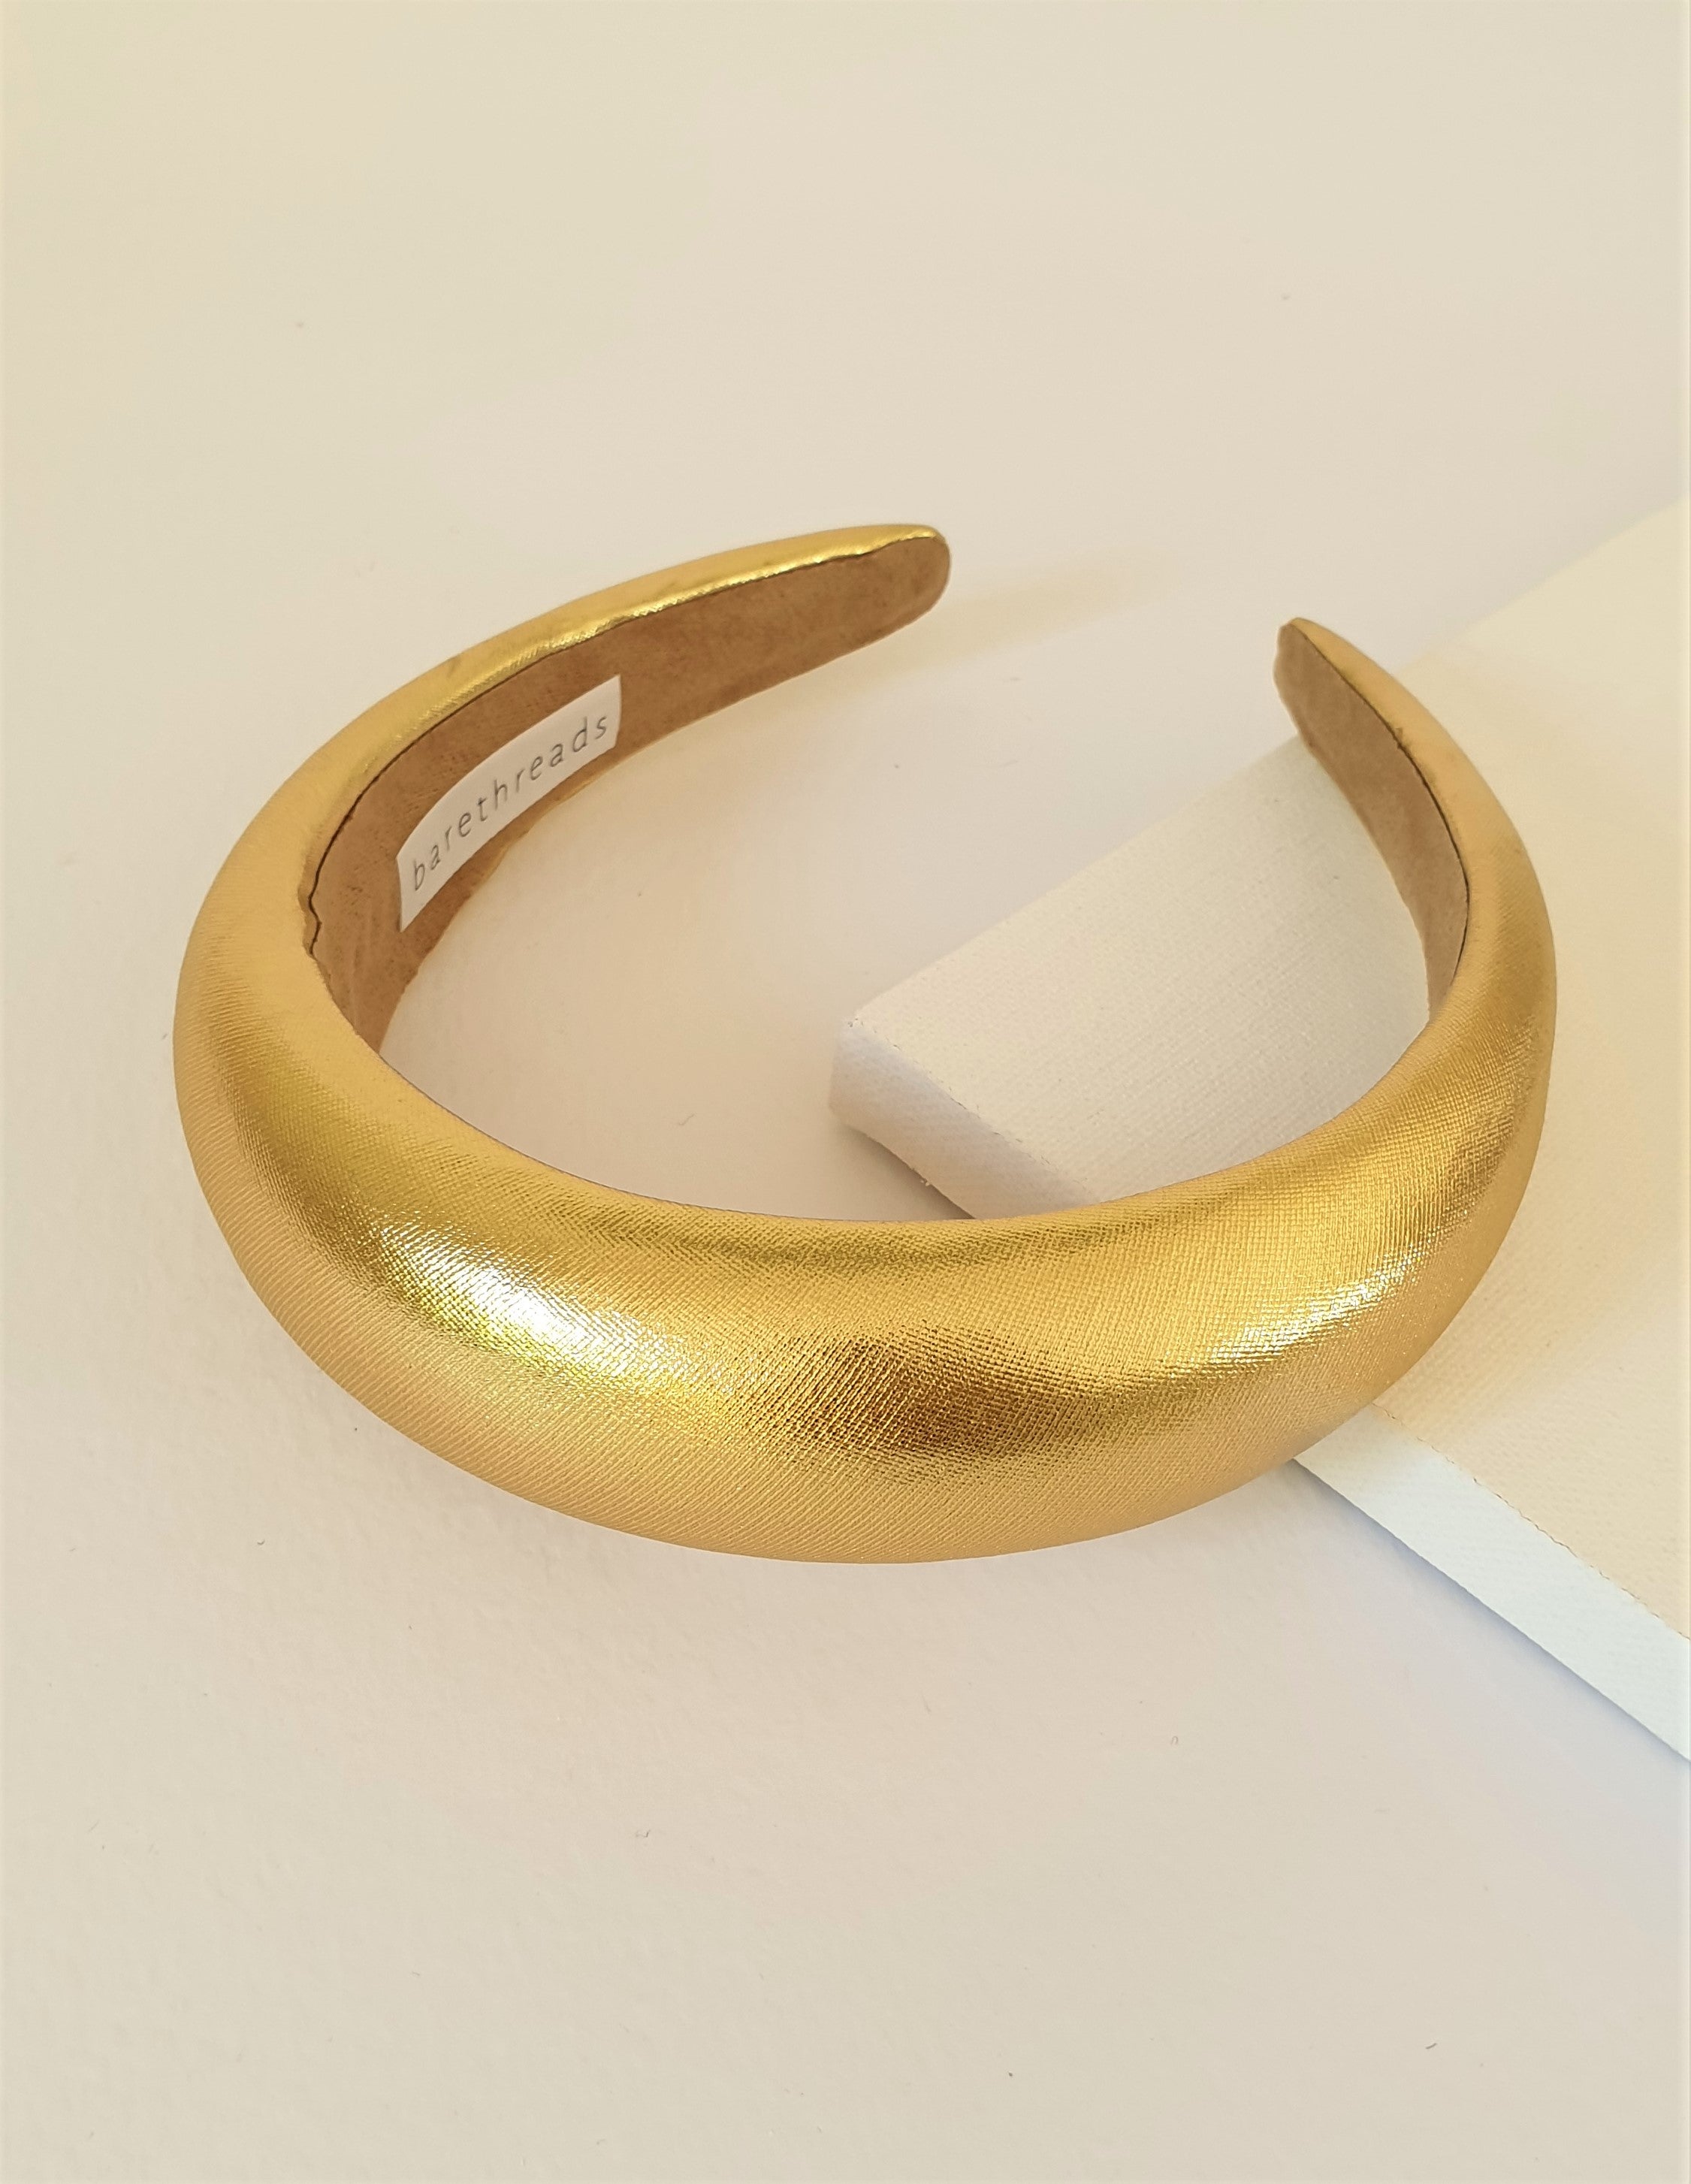 THE FRANCINE GOLD PADDED BAND